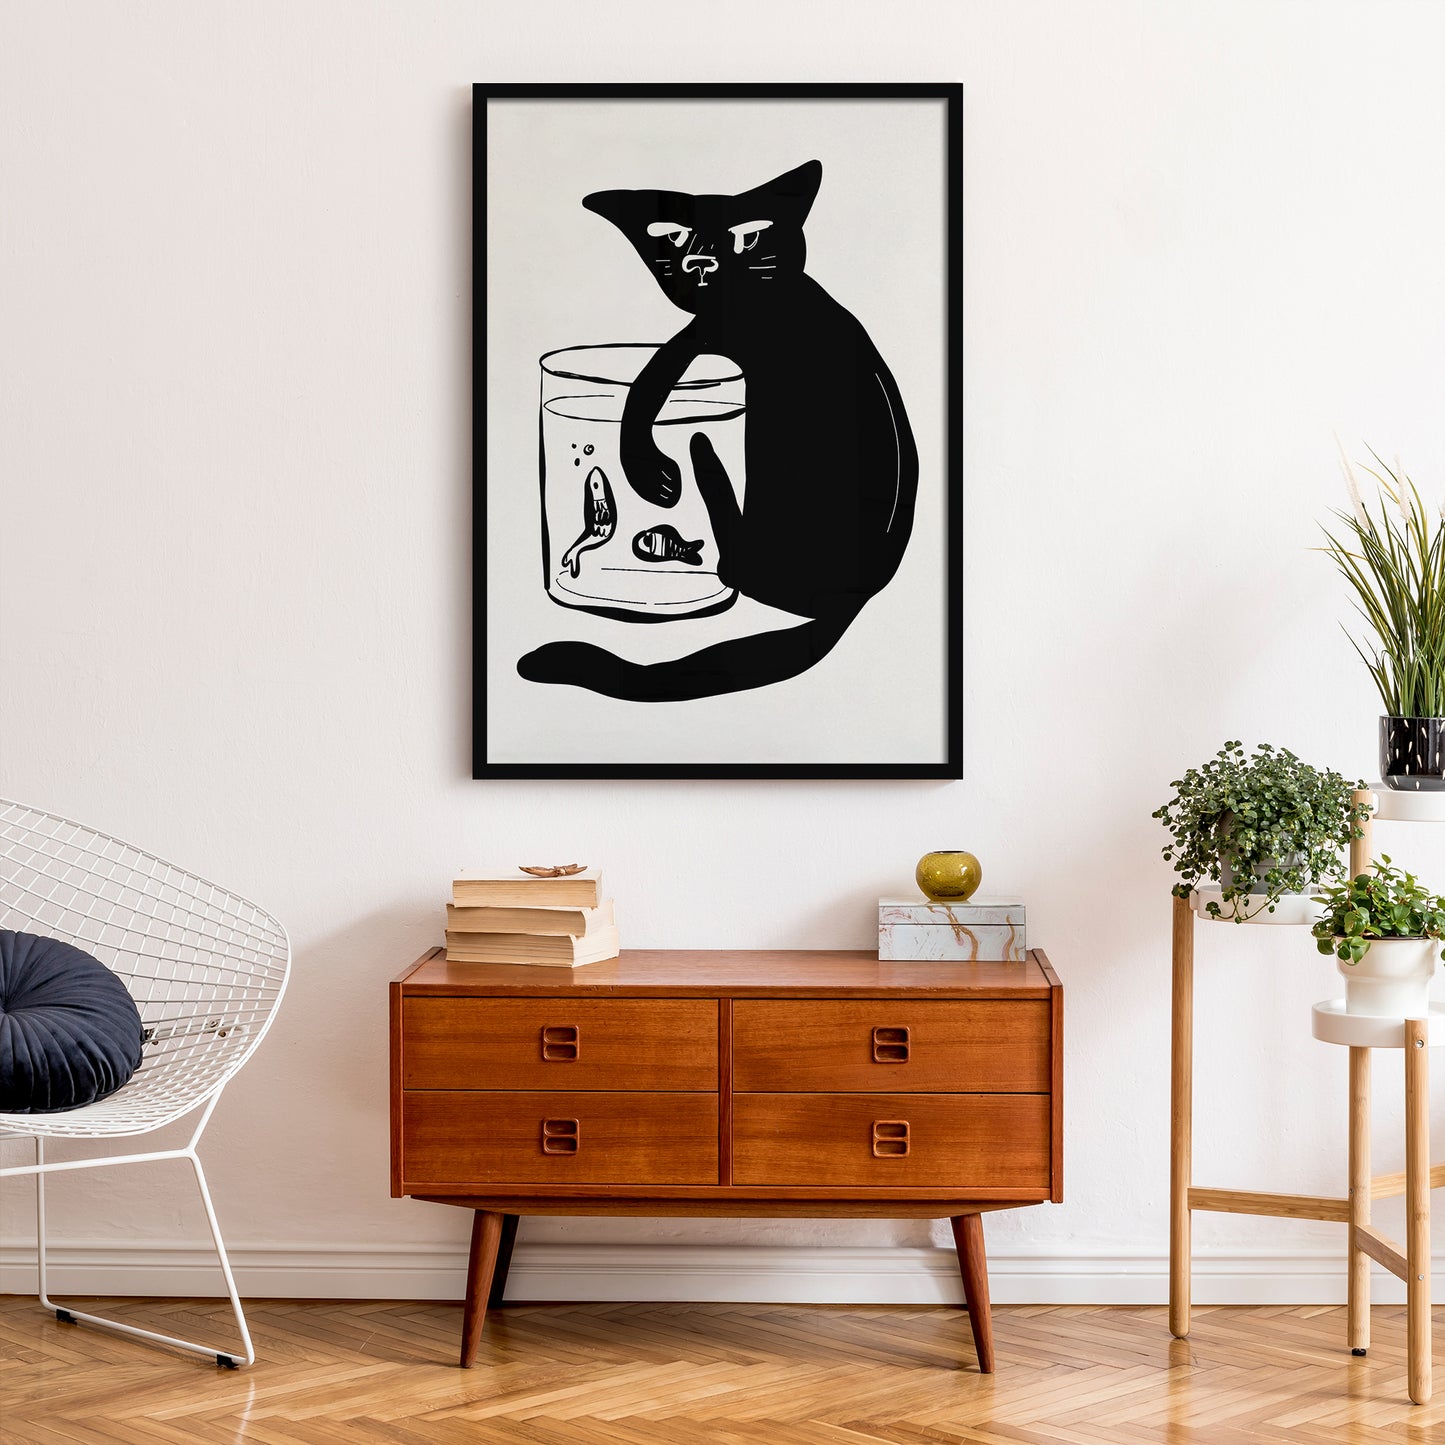 Set of 2 Funny Handdrawn Cats Animal Posters